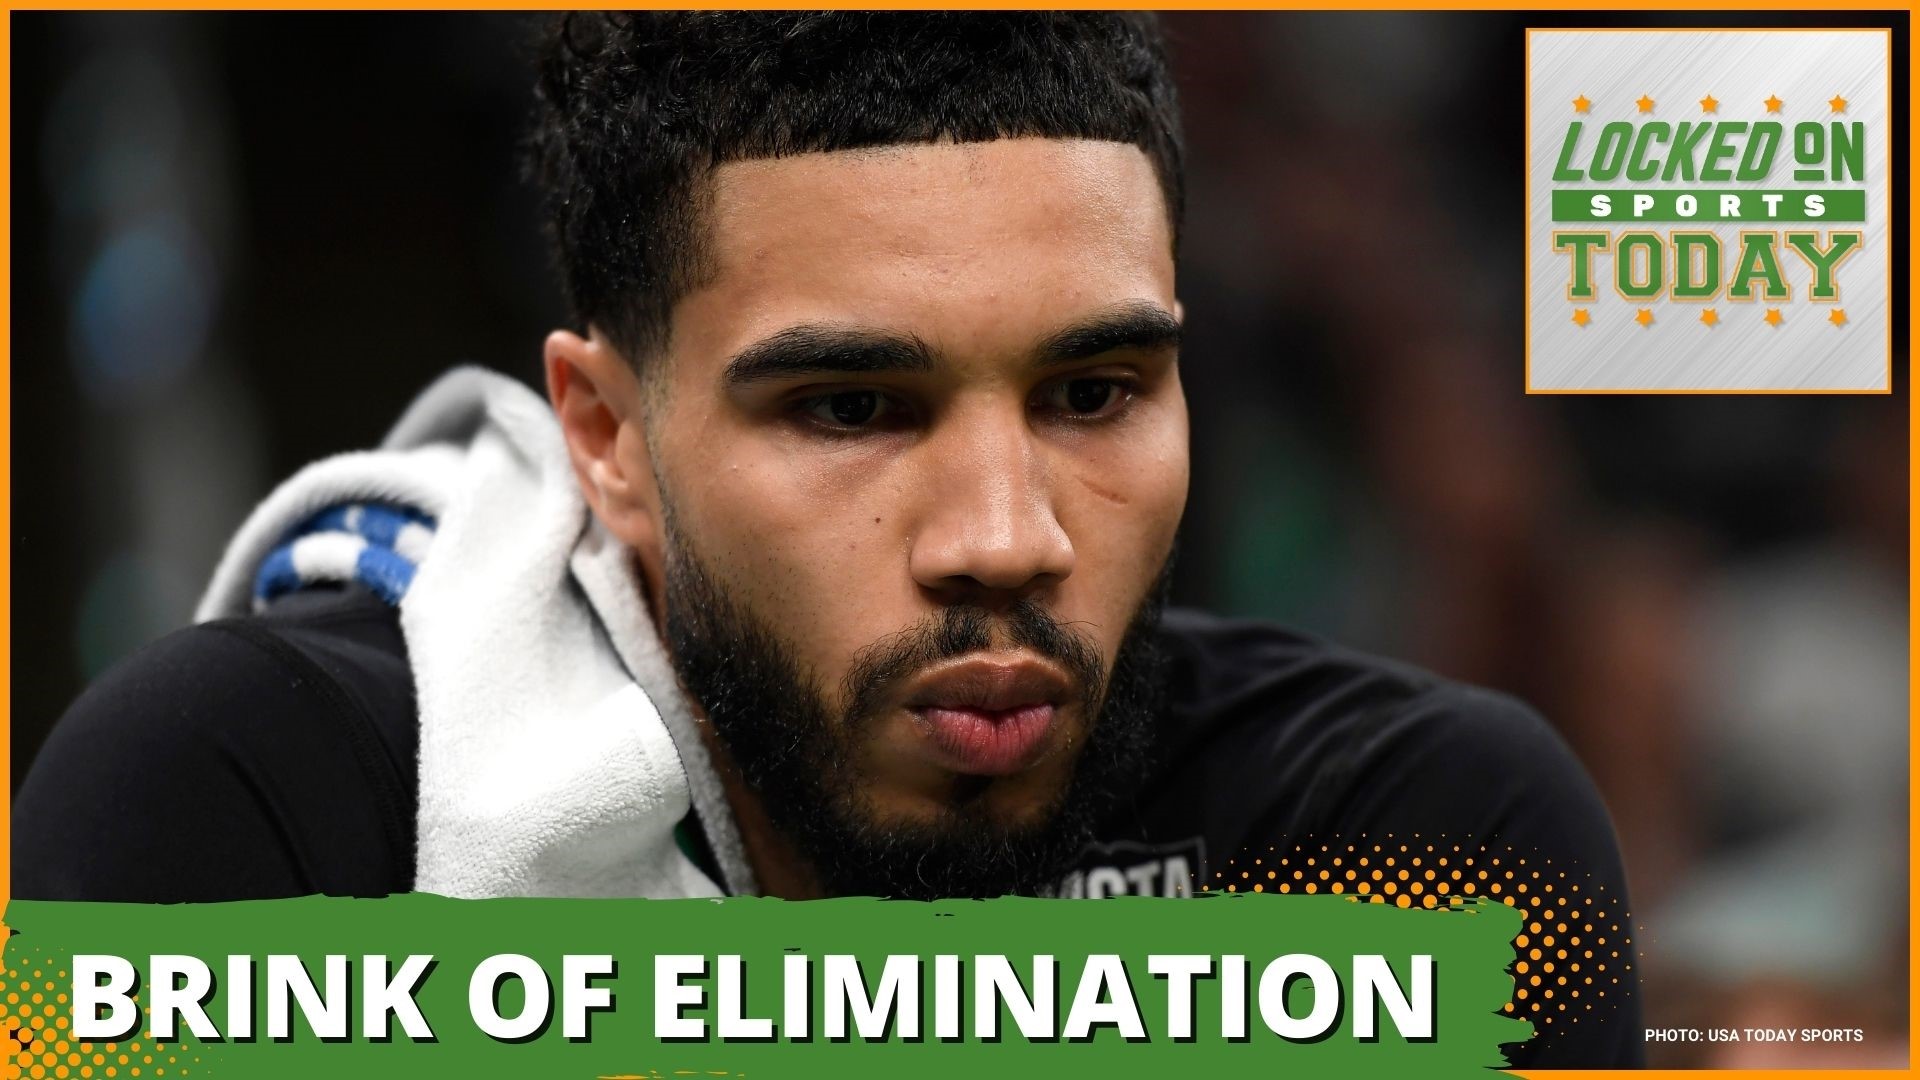 Discussing the day's top sports stories from the Boston Celtics facing elimination to the Nuggets taking the lead over the Suns in the NBA Playoffs.